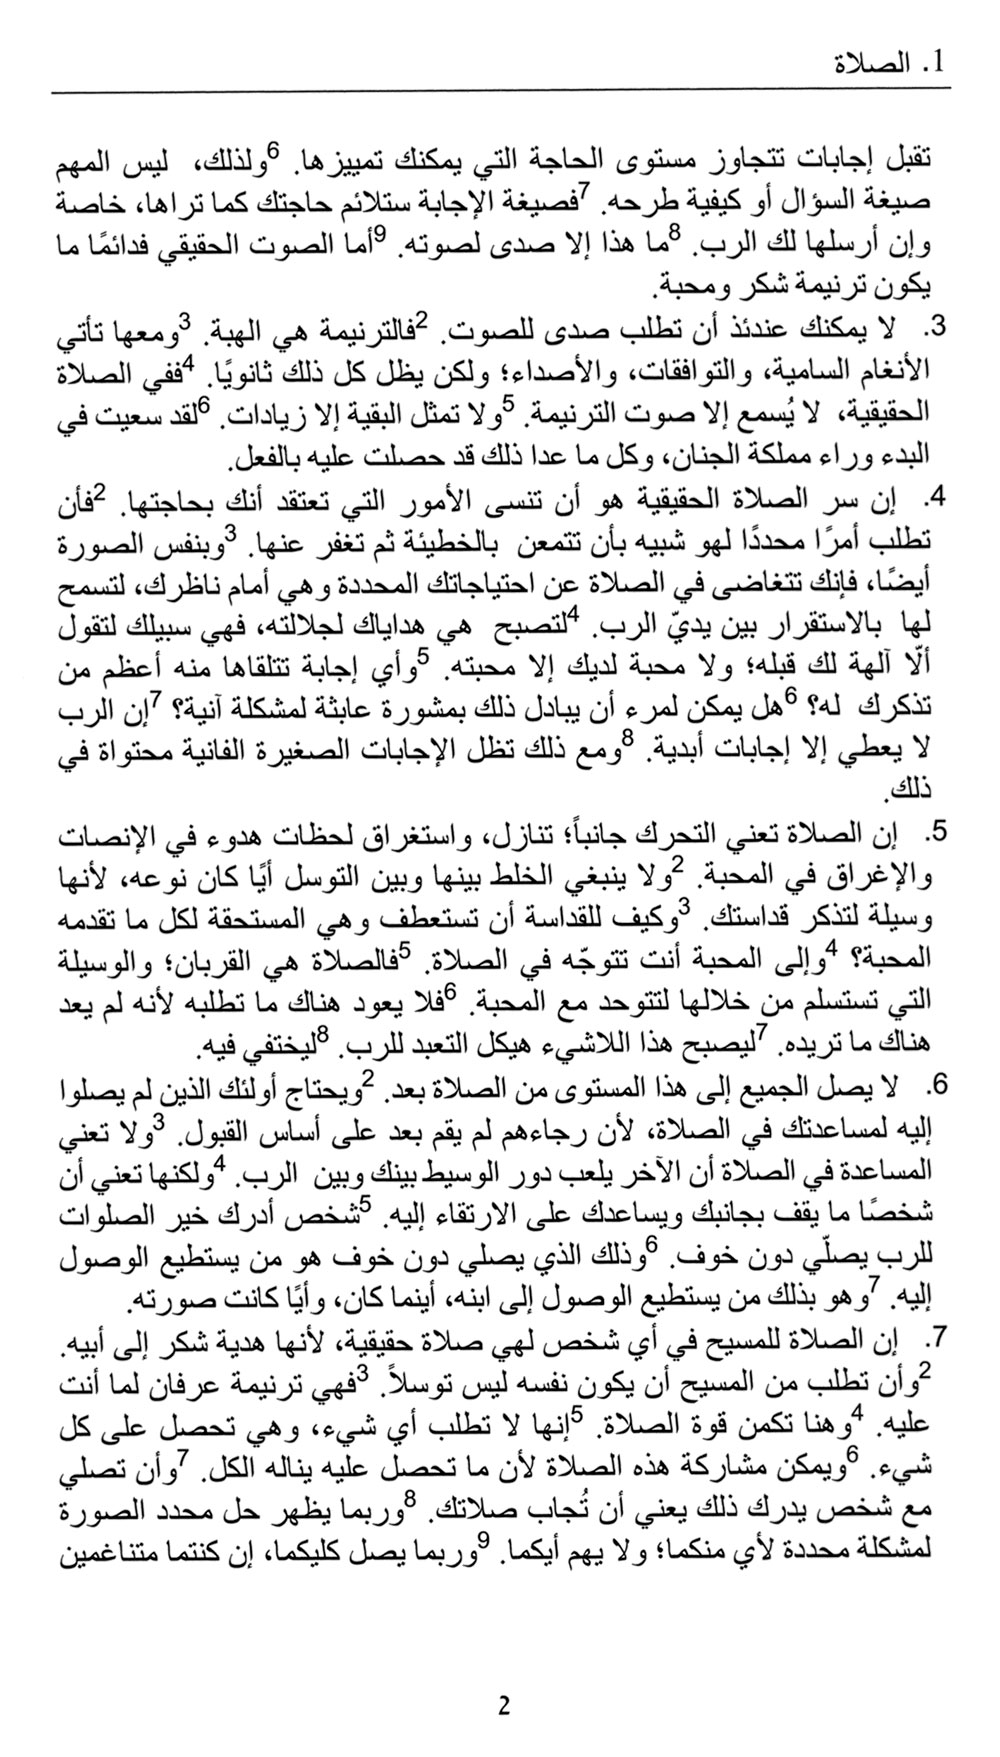 Arabic - Song of Prayer - Supplement - sample page